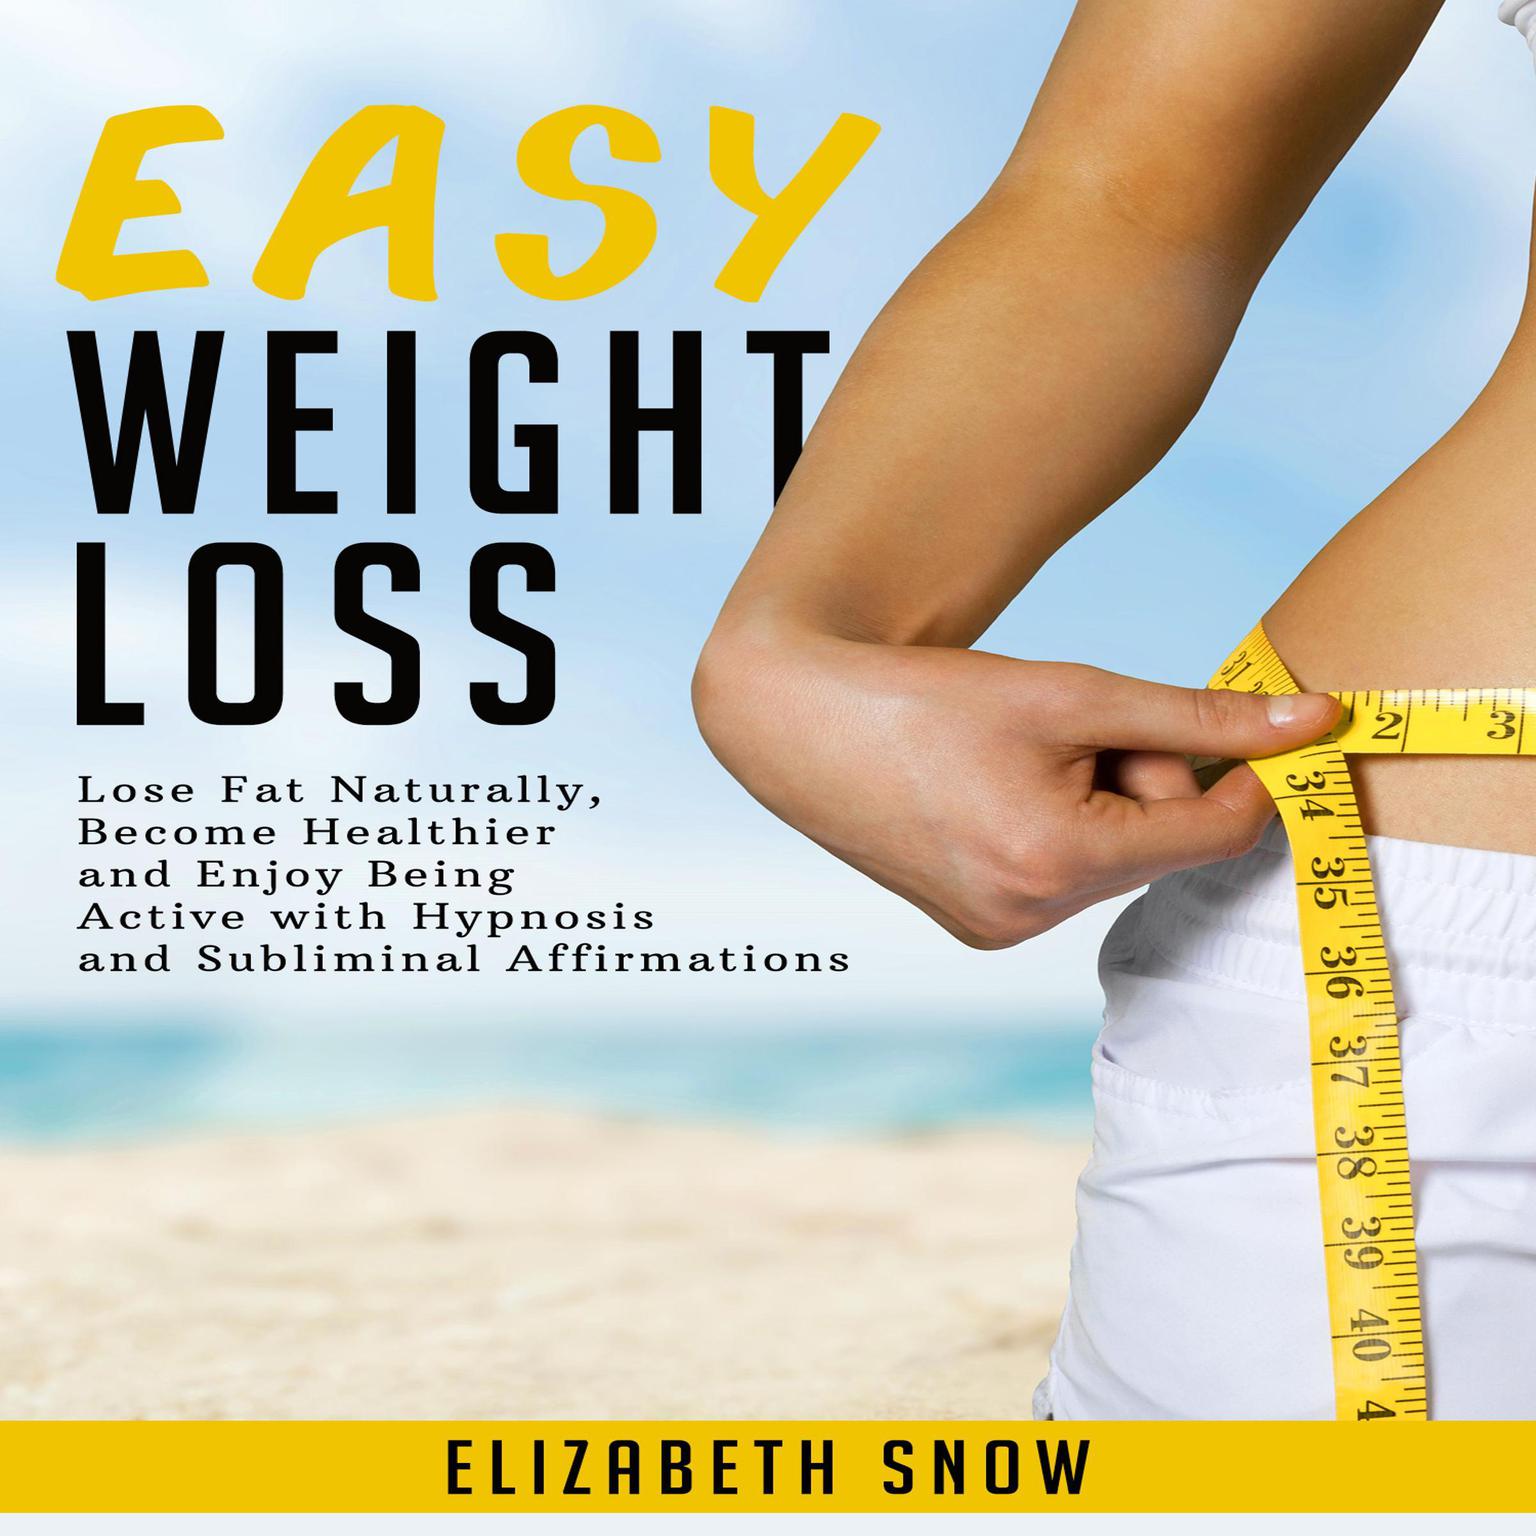 Easy Weight Loss: Lose Fat Naturally, Become Healthier and Enjoy Being Active with Hypnosis and Subliminal Affirmations Audiobook, by Elizabeth Snow